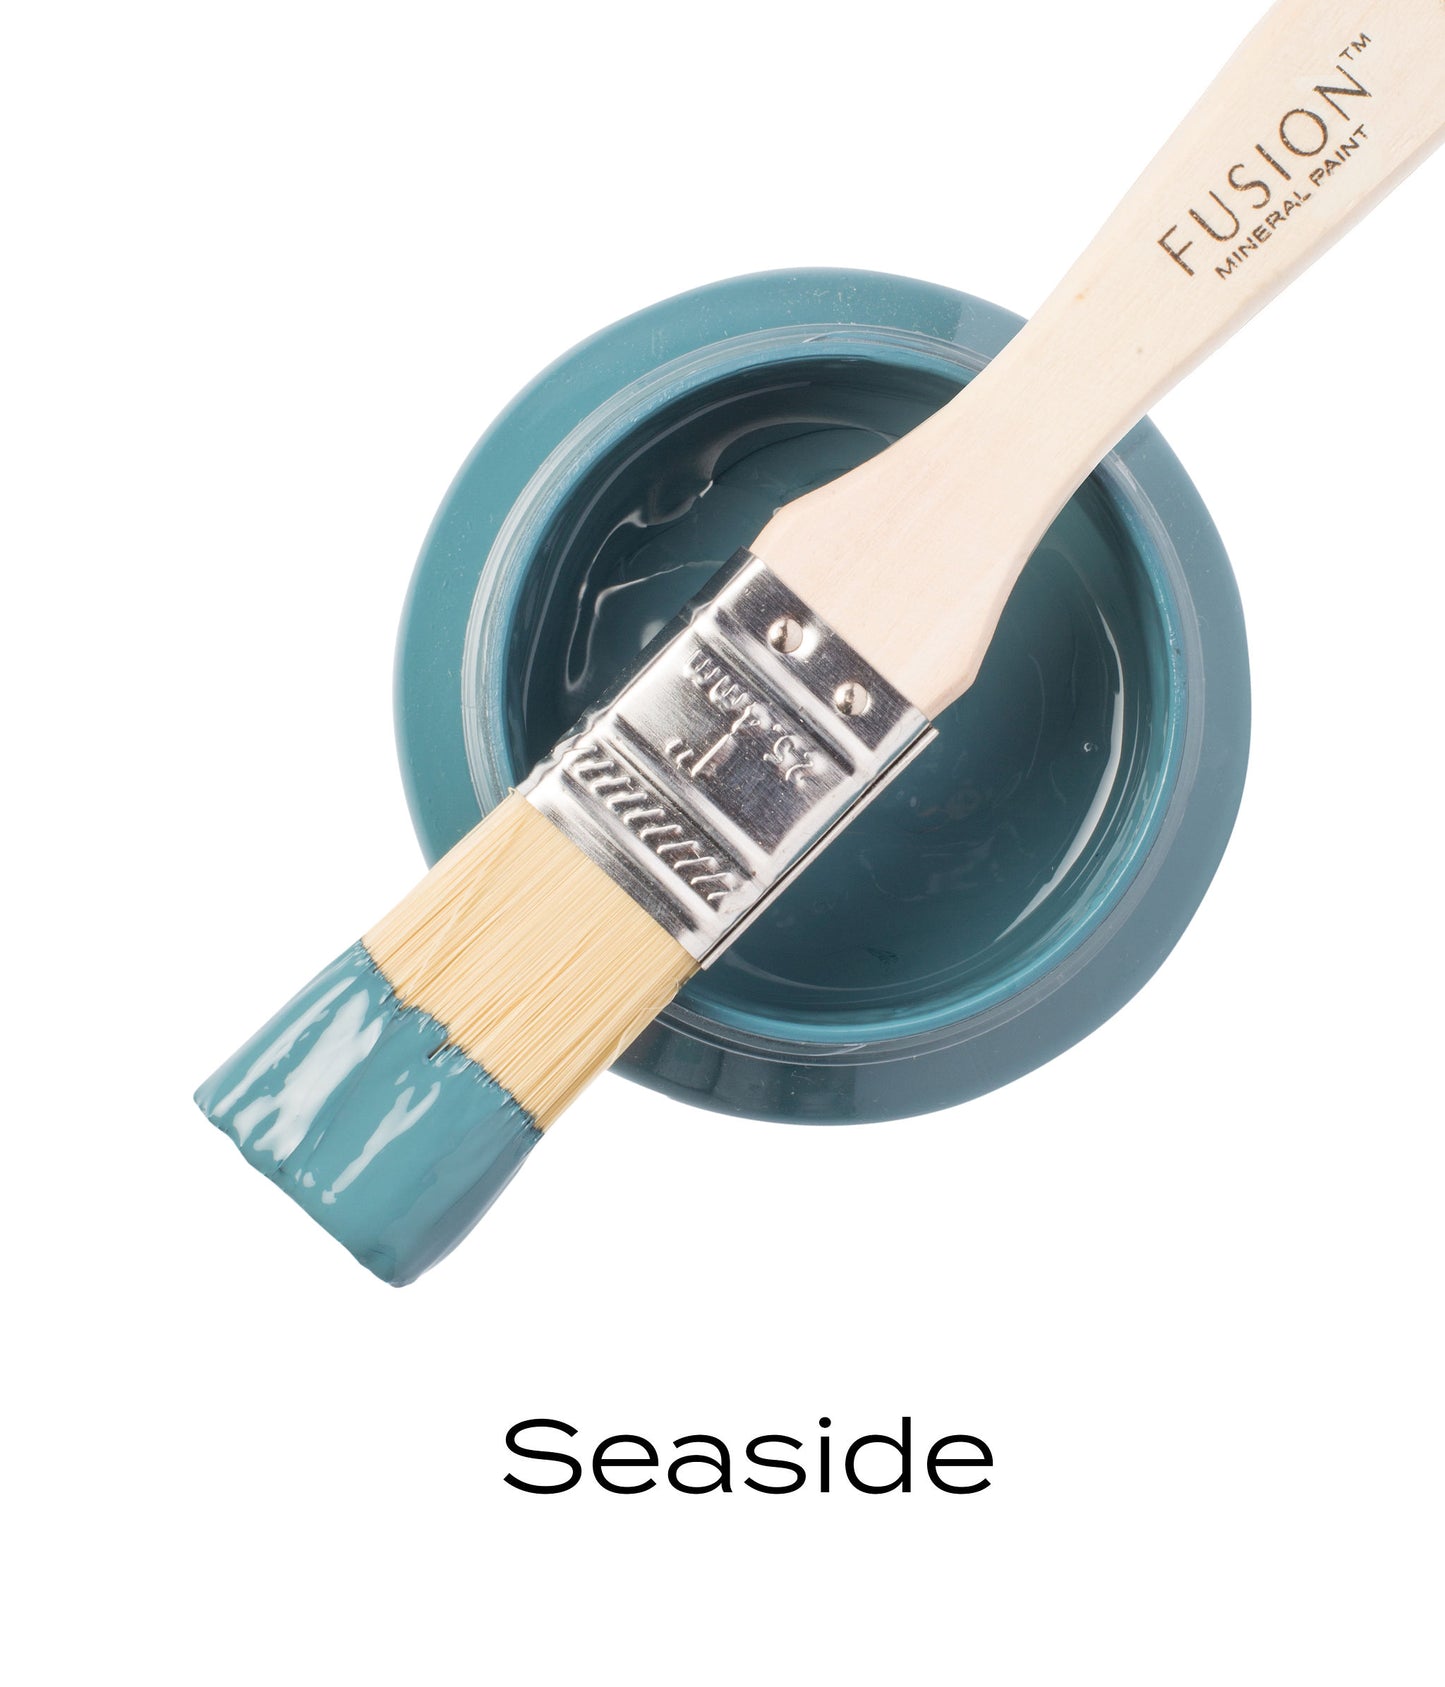 Fusion Mineral Paint Seaside